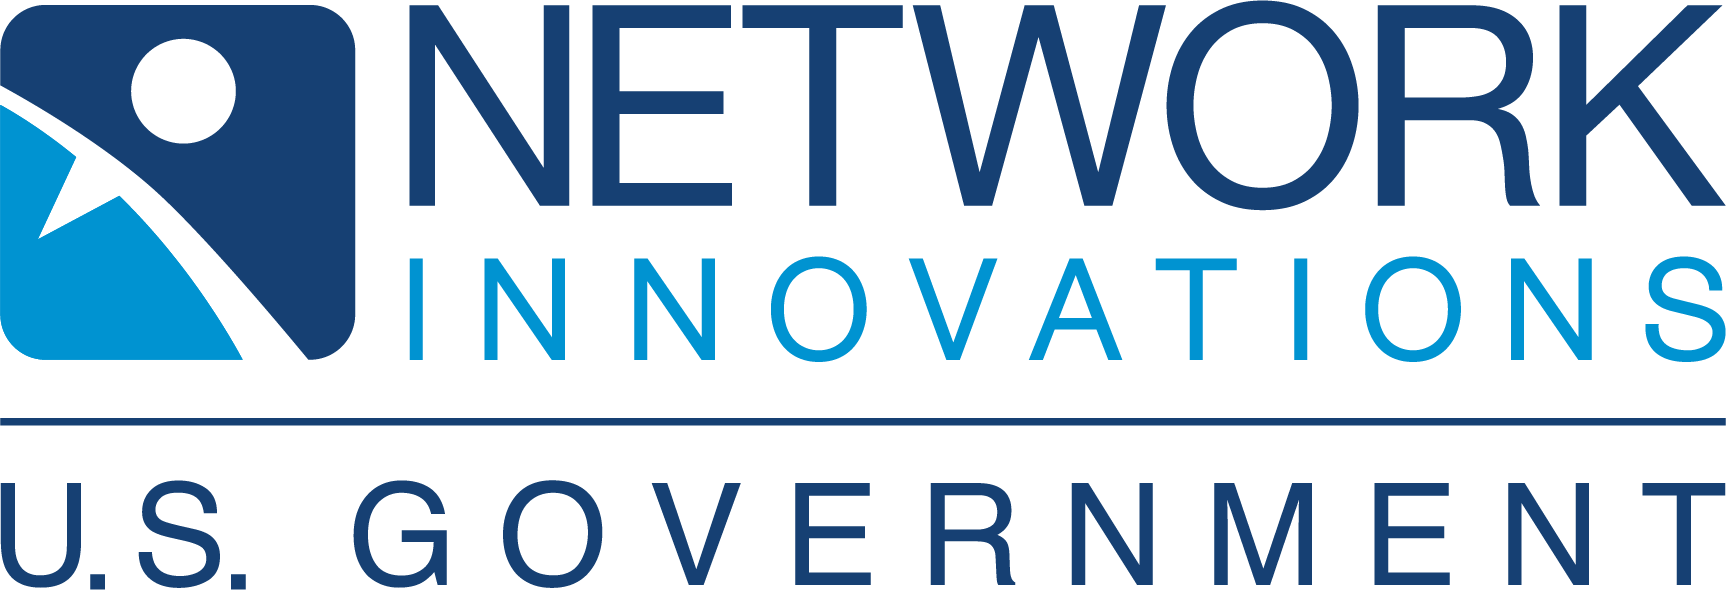 Network Innovations US Government Logo - Color